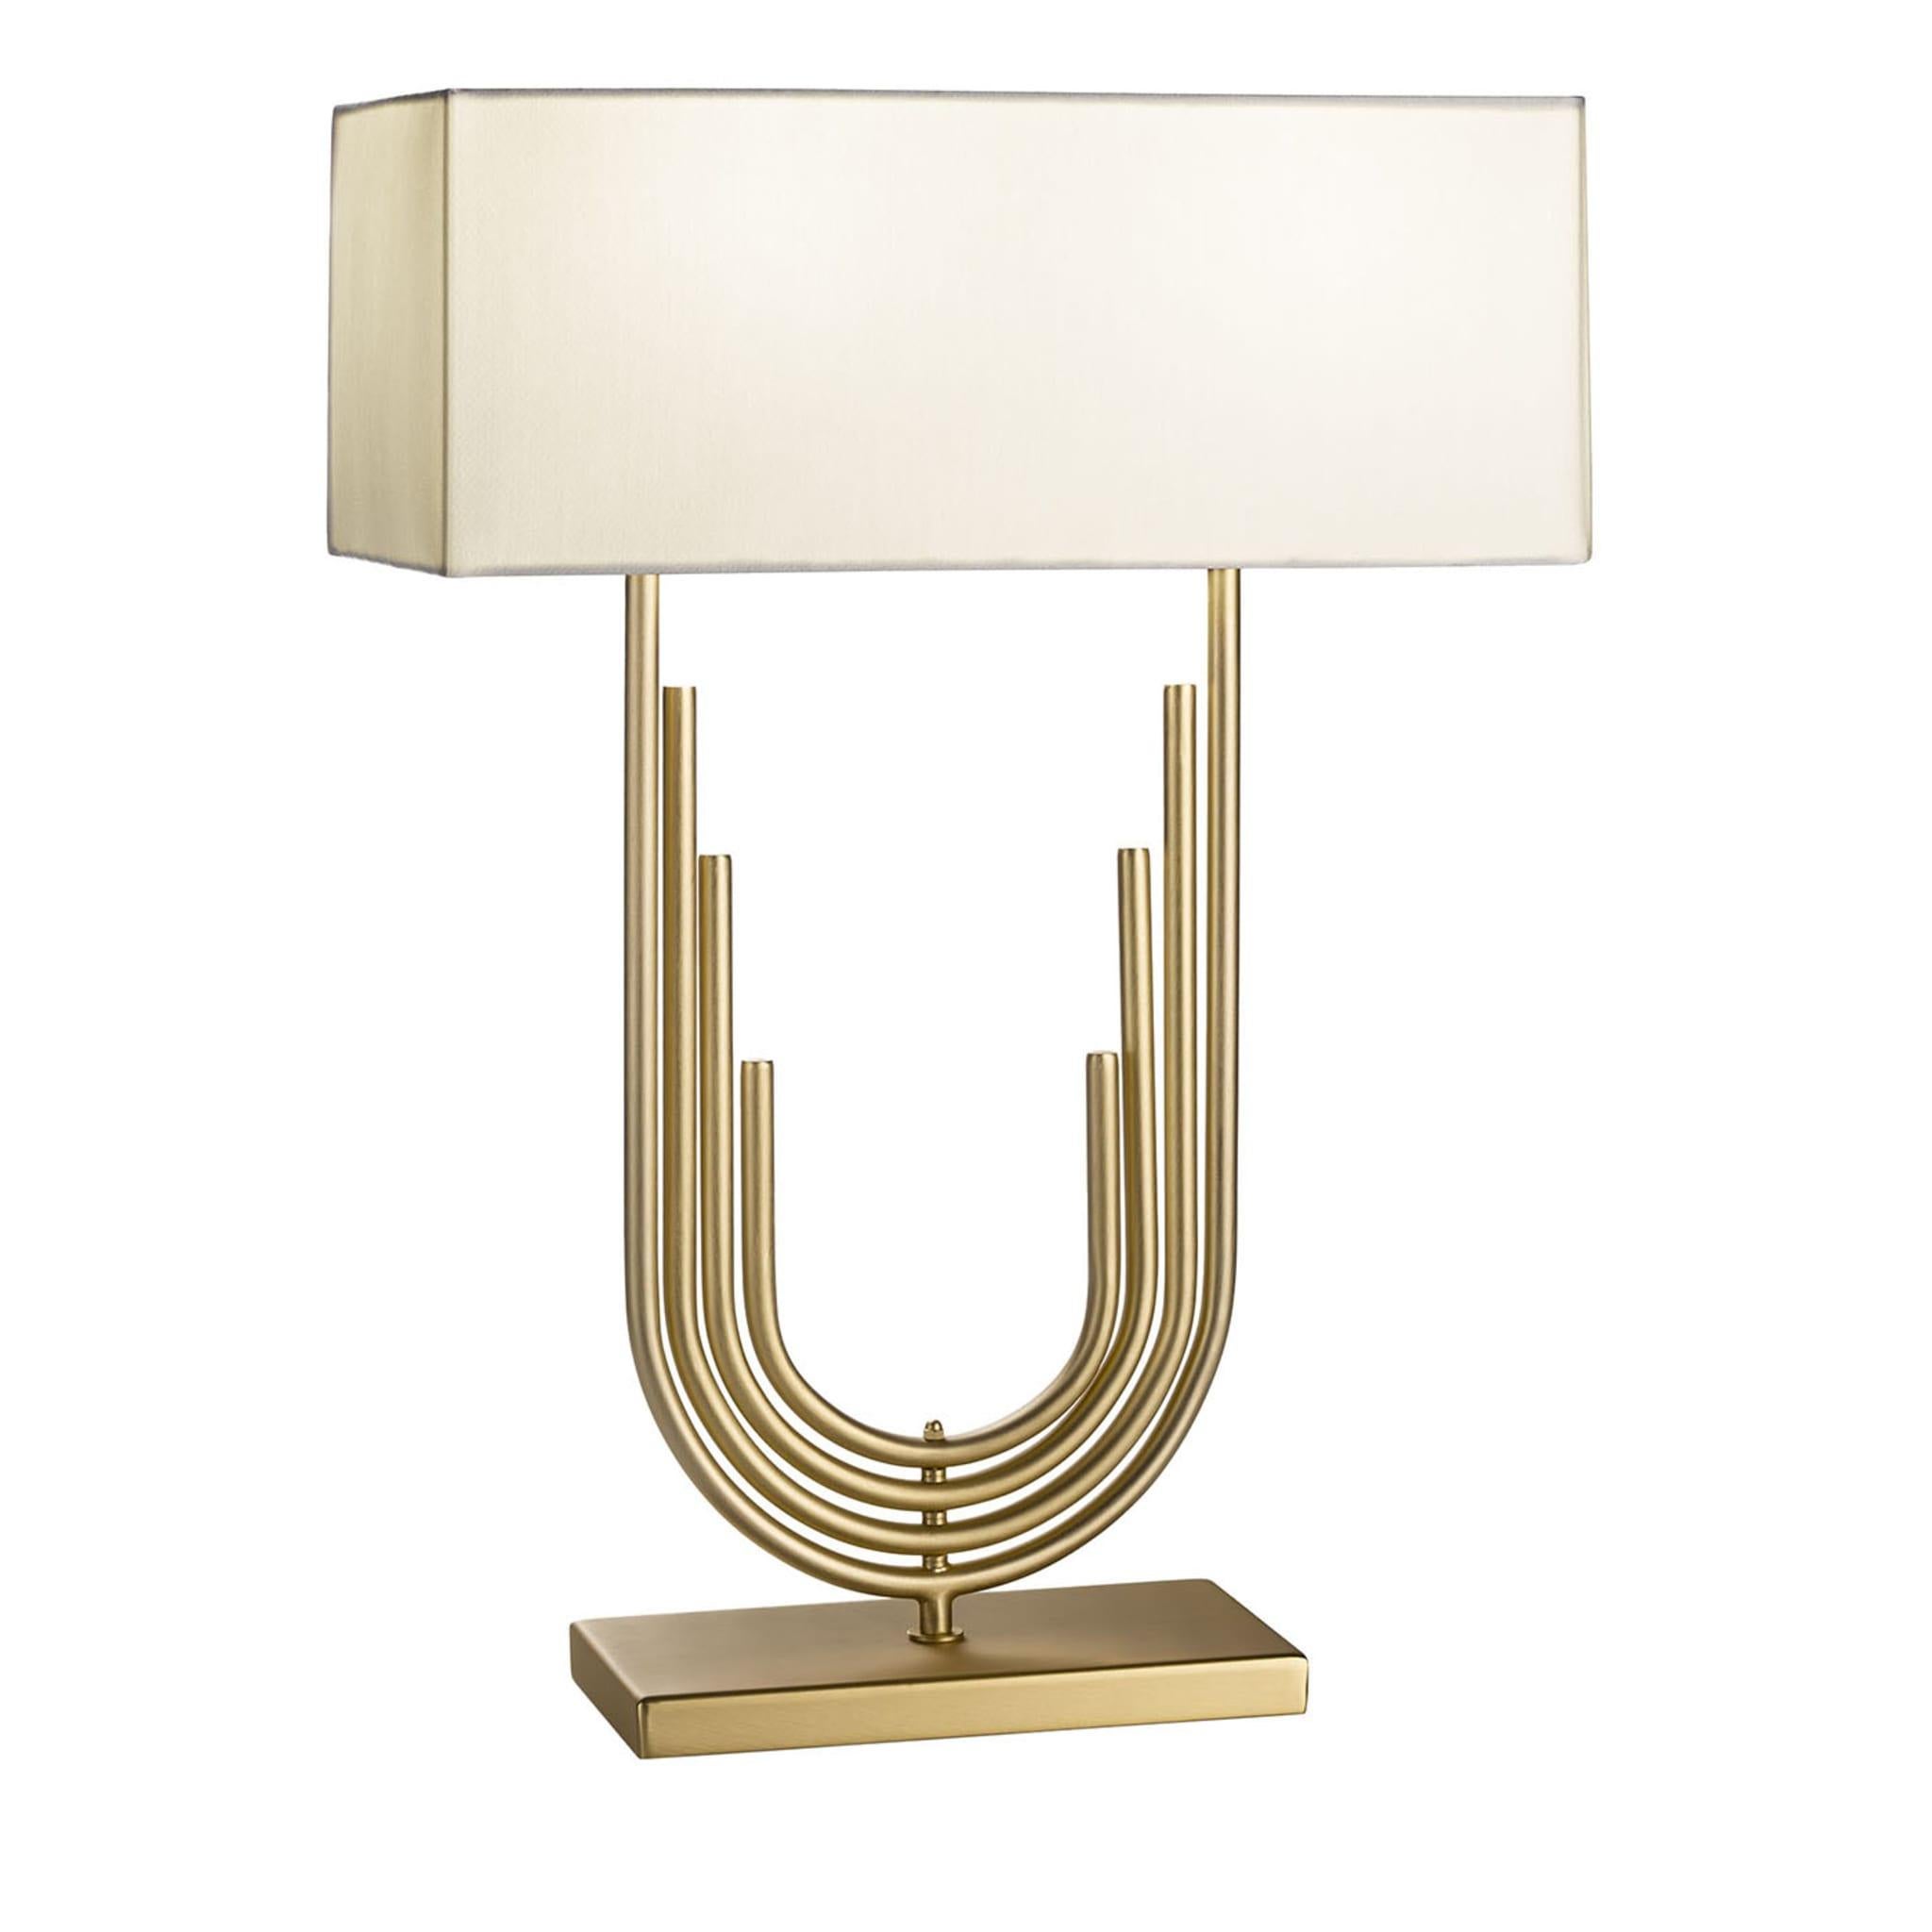 Delicacy and boldness unexpectedly coexist in this superb table lamp, its clean-lined fabric shade revealing an elegant neoclassical inspiration. Stemming from a coordinated rectangular base, the central brass body consists of a series of staggered,